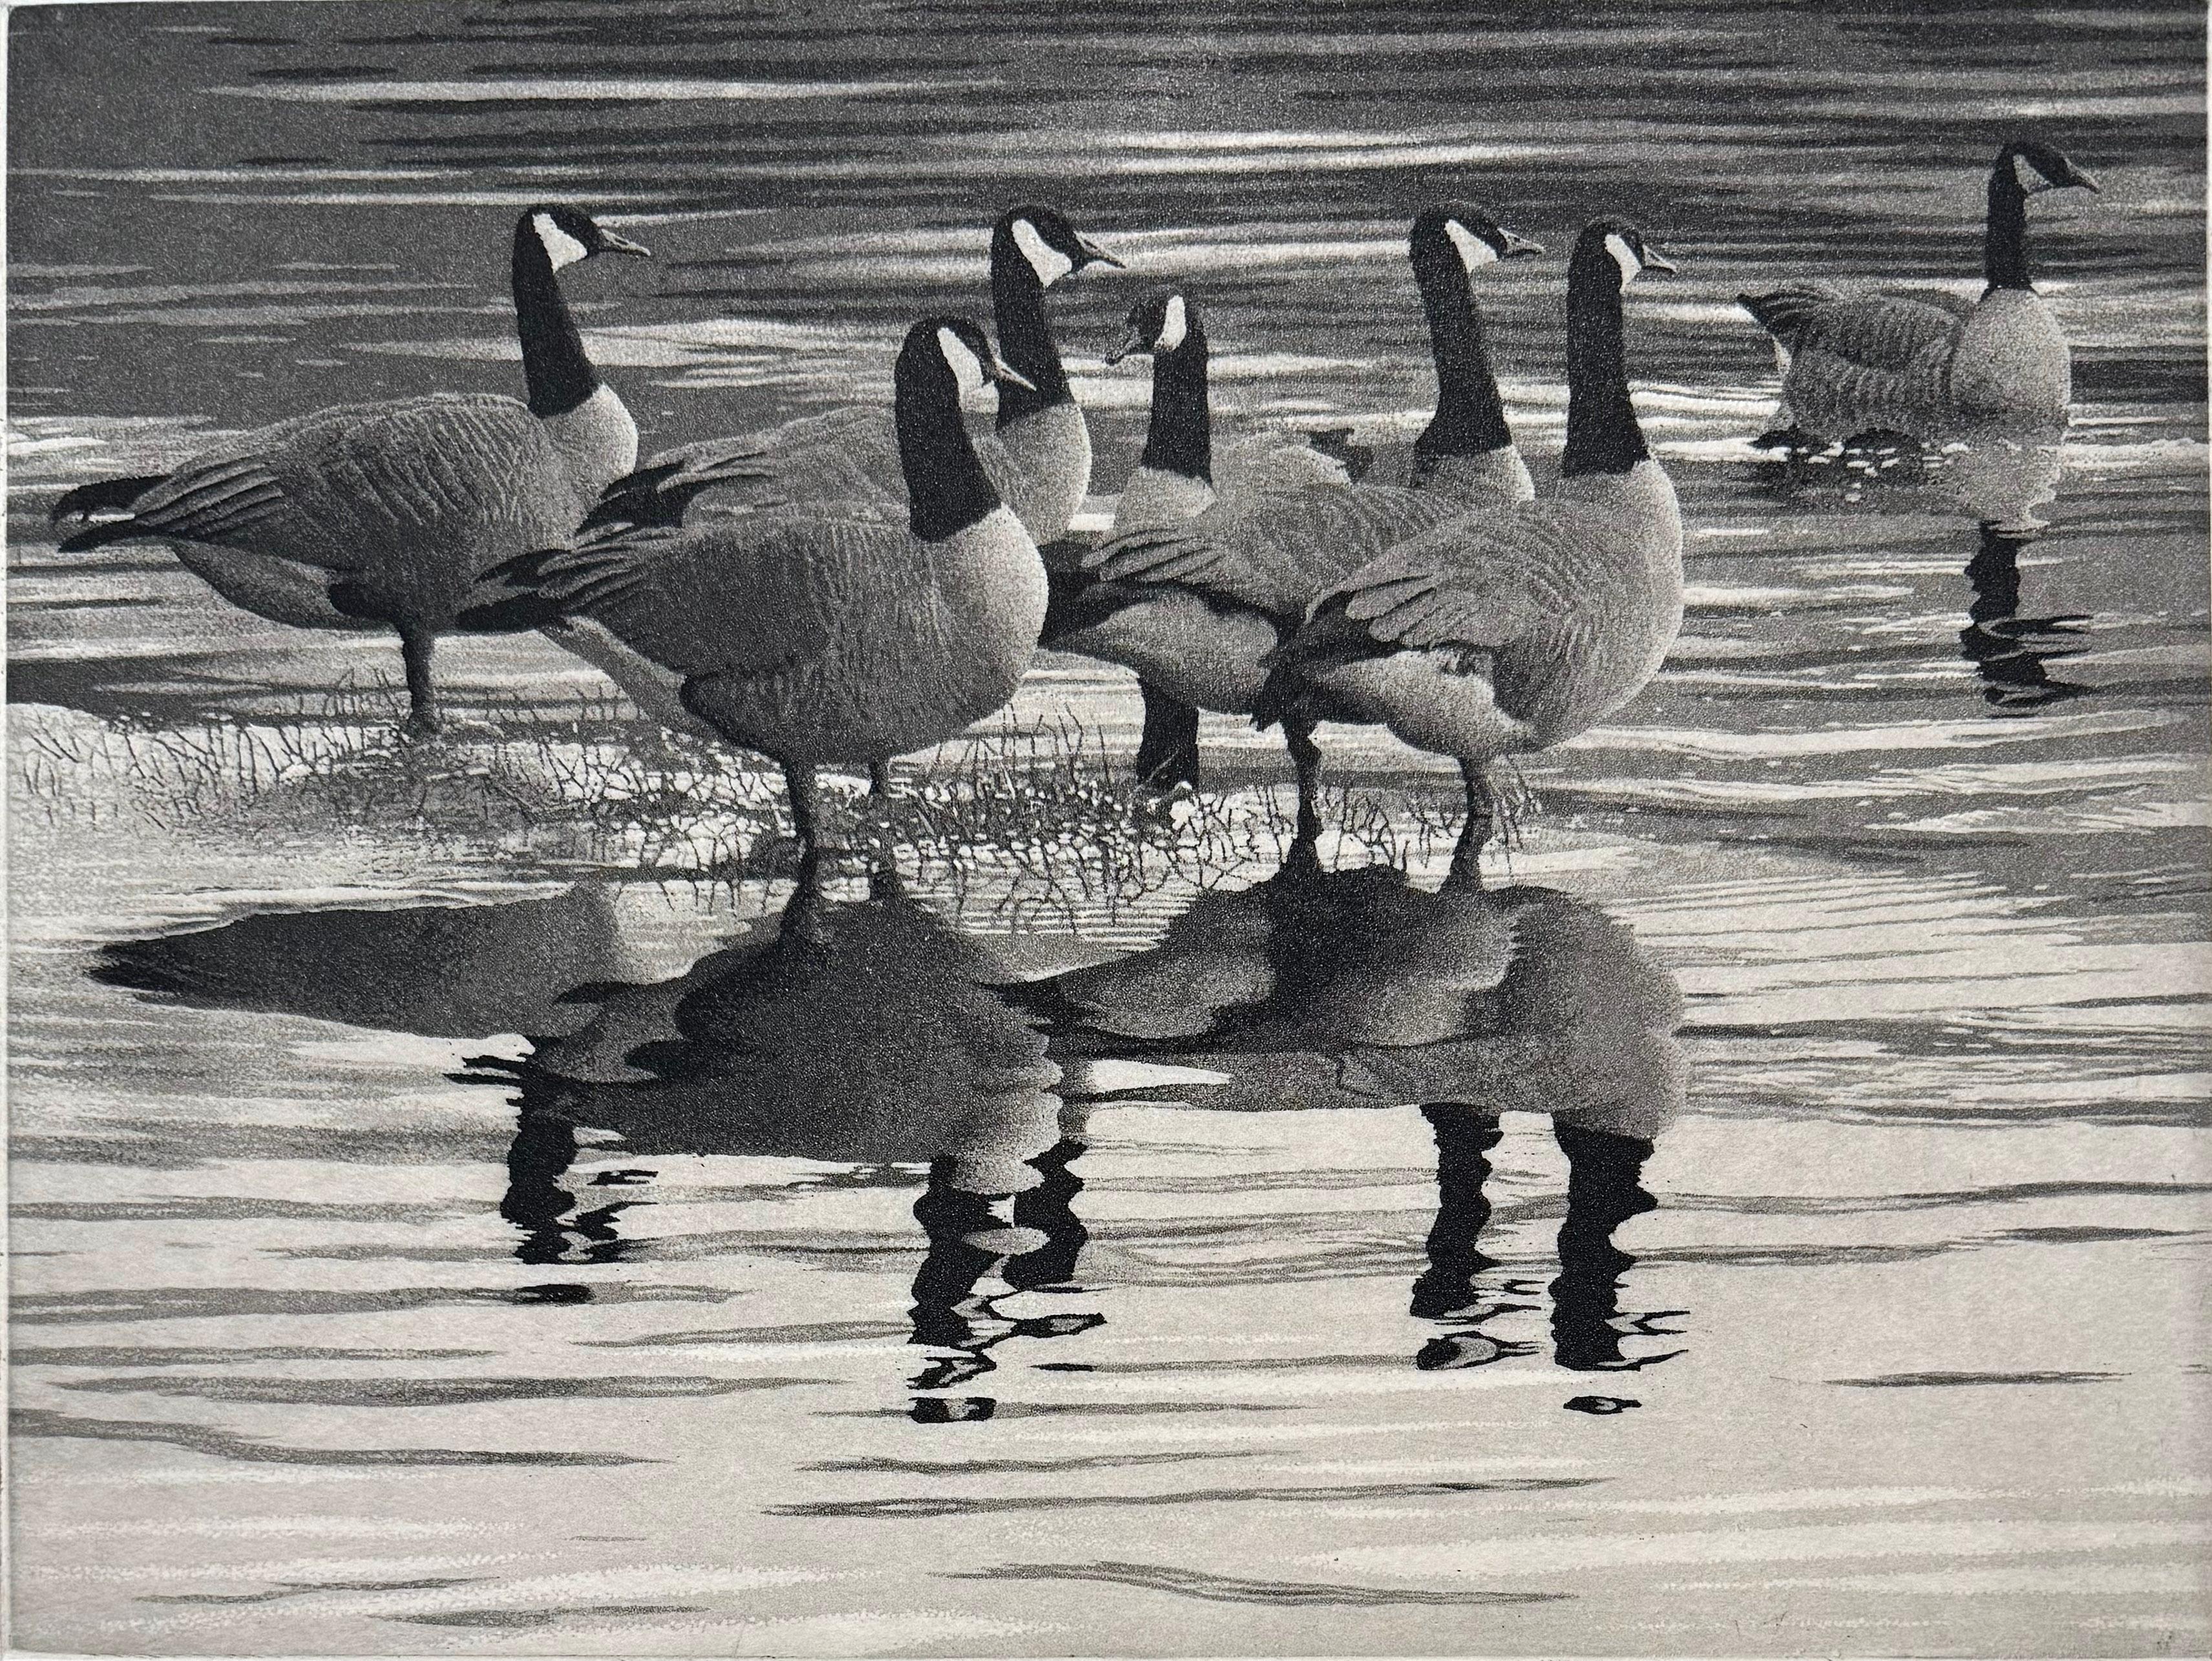 Medium: etching and aquatint
Edition of 250
Year: 2014
Image Size: 9 x 12 inches
Signed, titled and numbered by the artist.

Inspired by a scene of seven Canadian Geese in Lake Padden, Bellingham, WA. This is a perfect example of McMillan's work. He